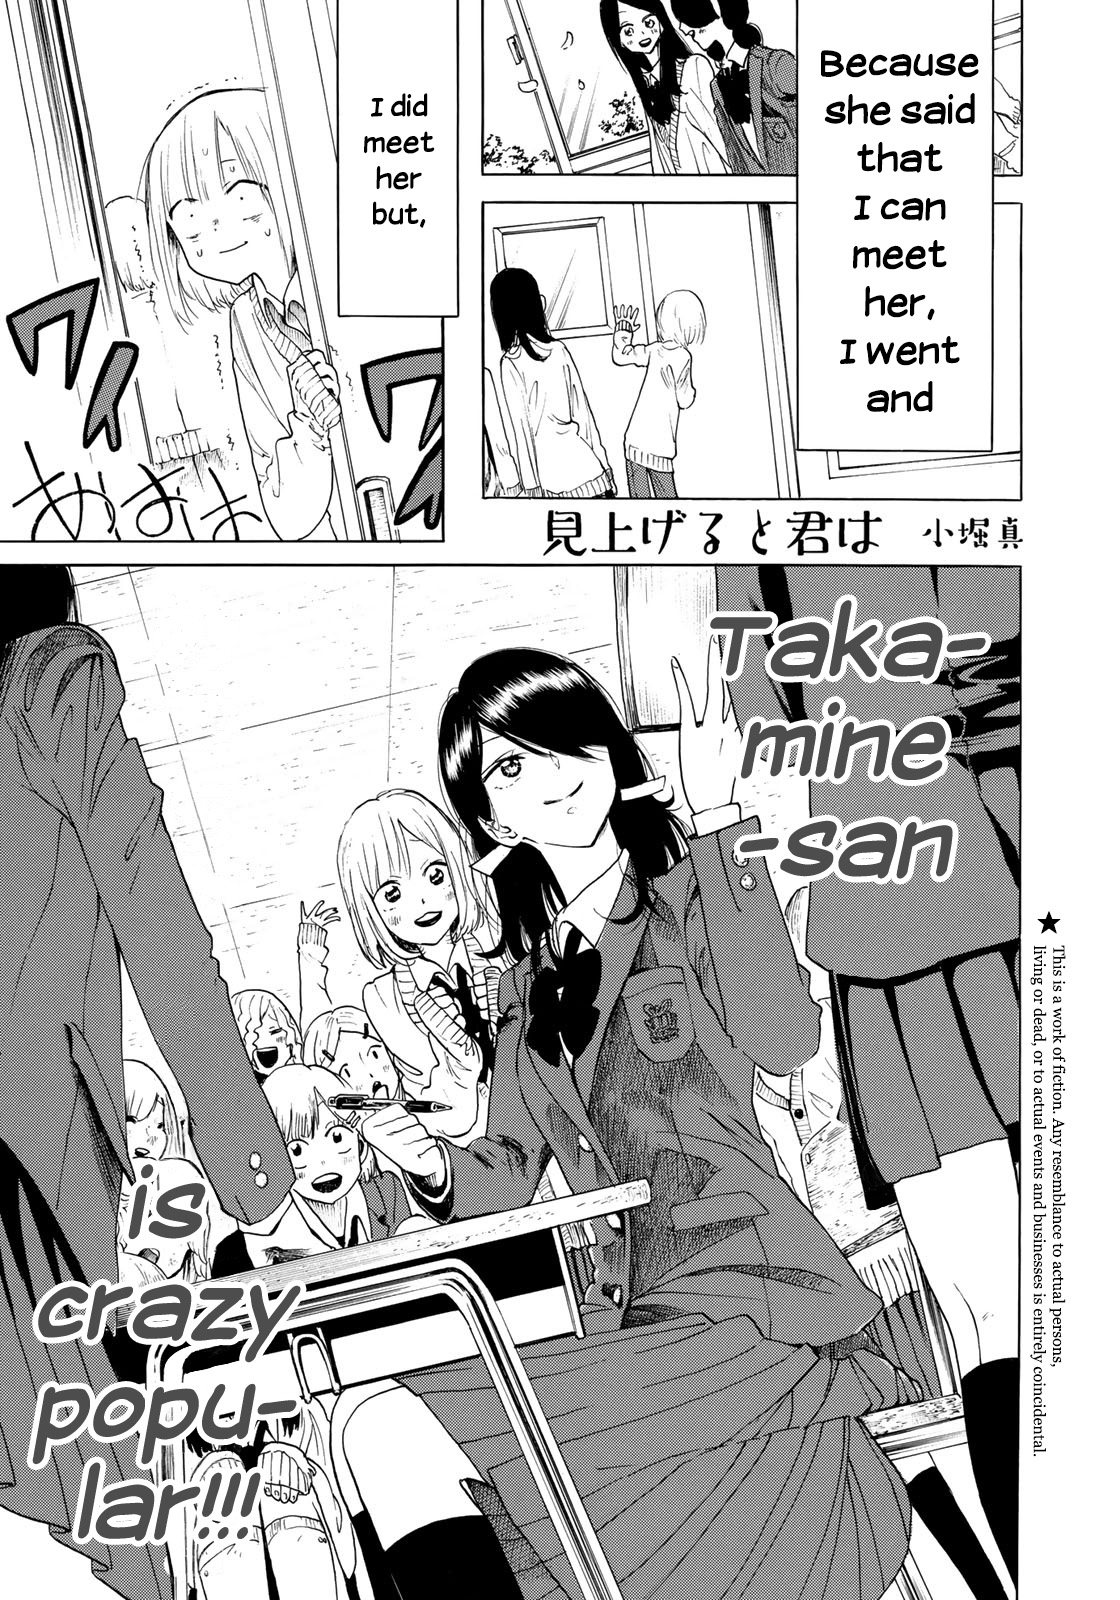 Looking Up to You Vol. 1 Ch. 5 After a little bit